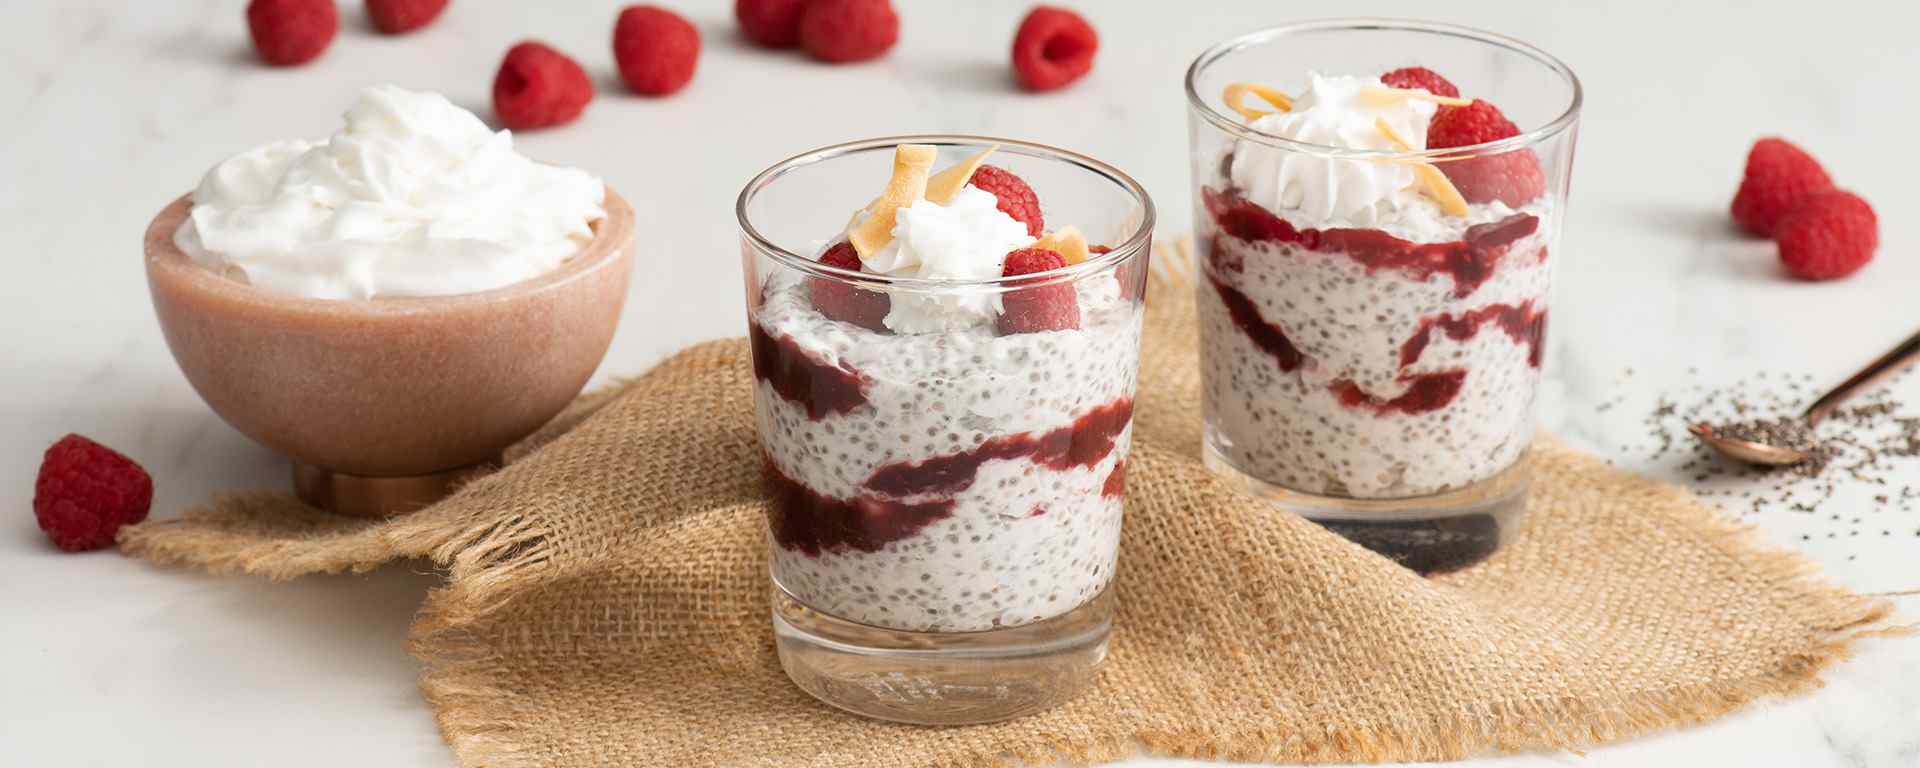 Photo for - Coconut Chia Pudding with Raspberry Swirl